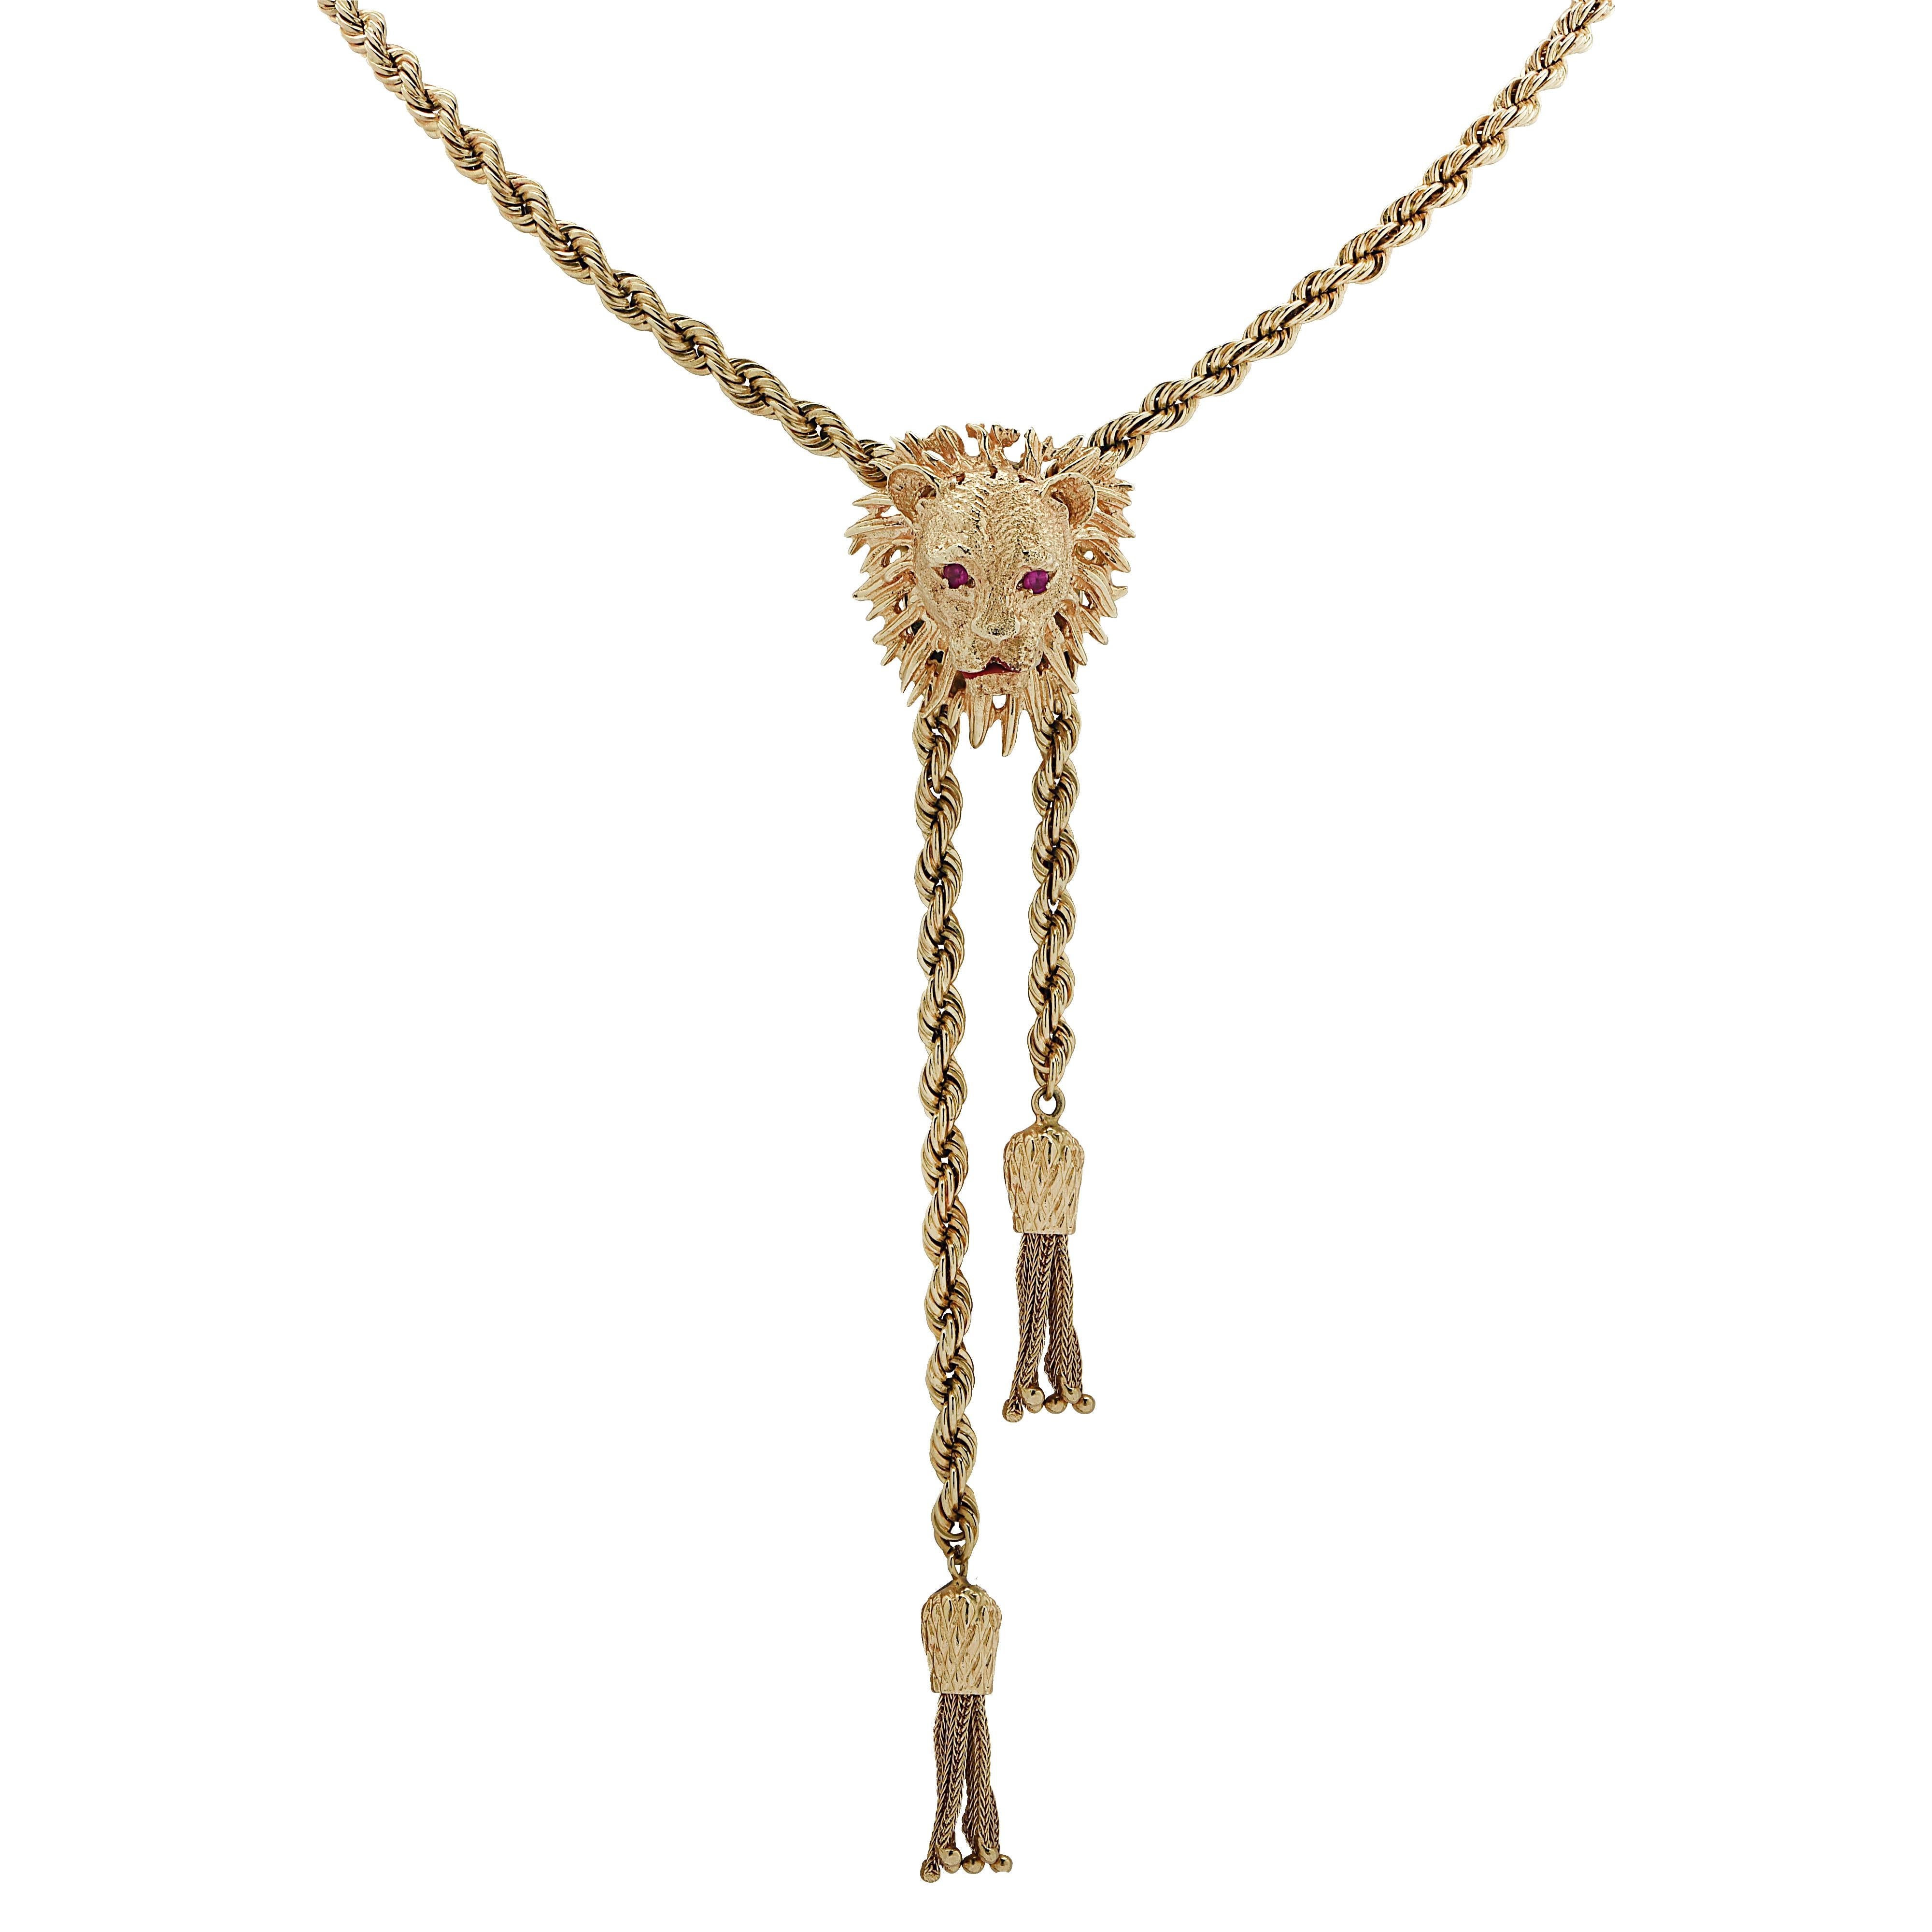 Regal yellow gold lariat necklace crafted in yellow gold showcasing an intricately crafted Lion’s Head with ruby eyes and a red enamel mouth. Twisted gold rope chain detailed with yellow gold tassels, threads through the back of the Lion’s Head. The